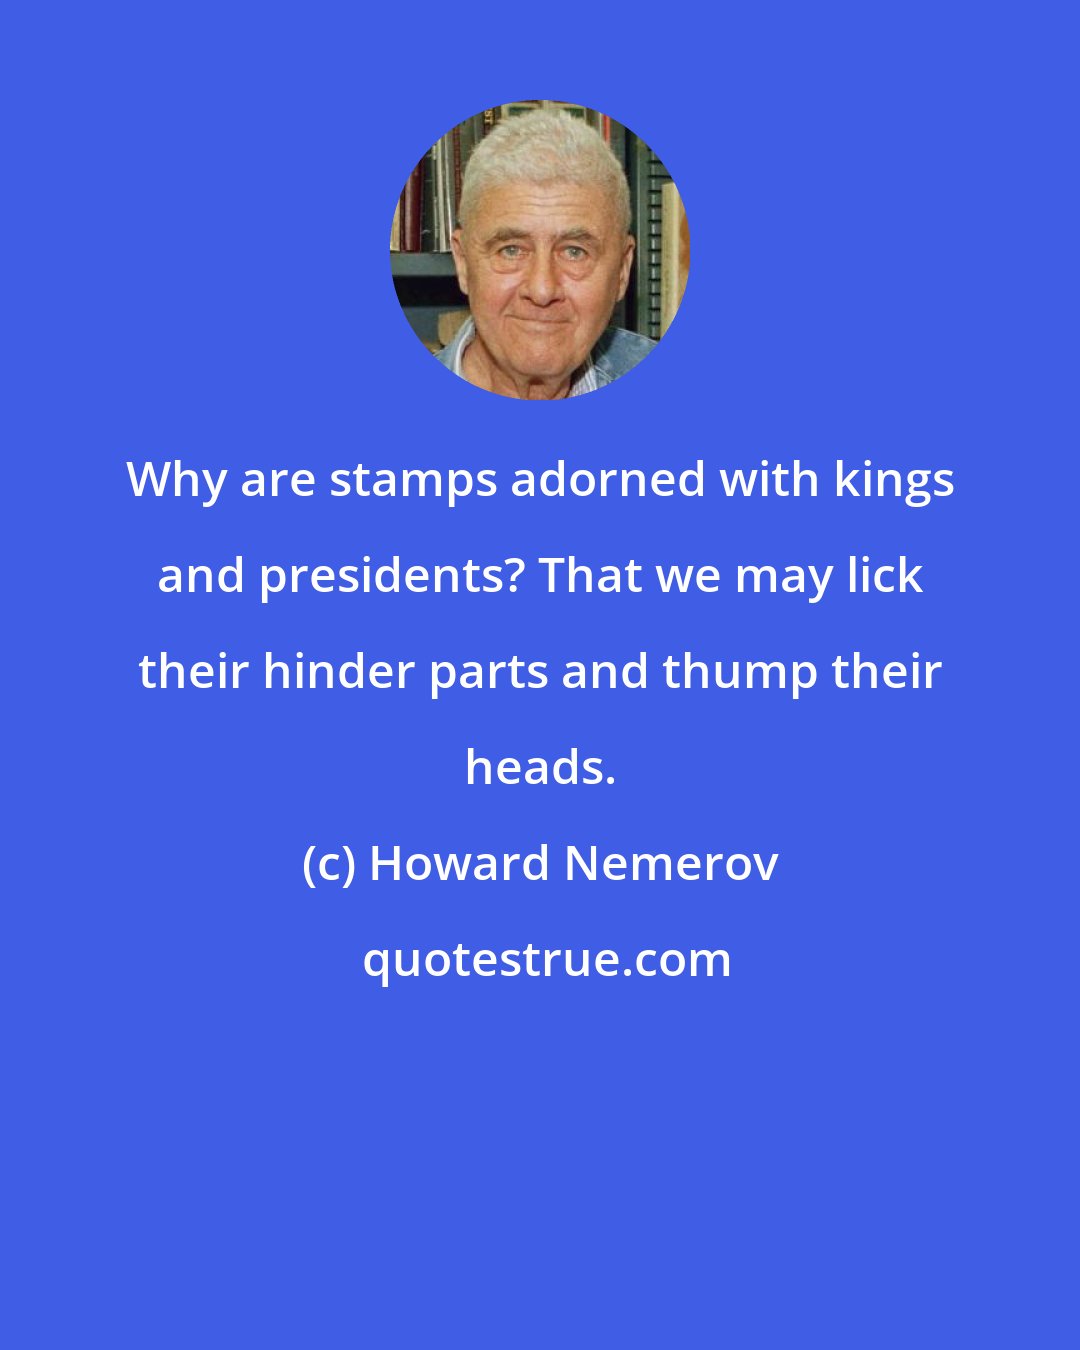 Howard Nemerov: Why are stamps adorned with kings and presidents? That we may lick their hinder parts and thump their heads.